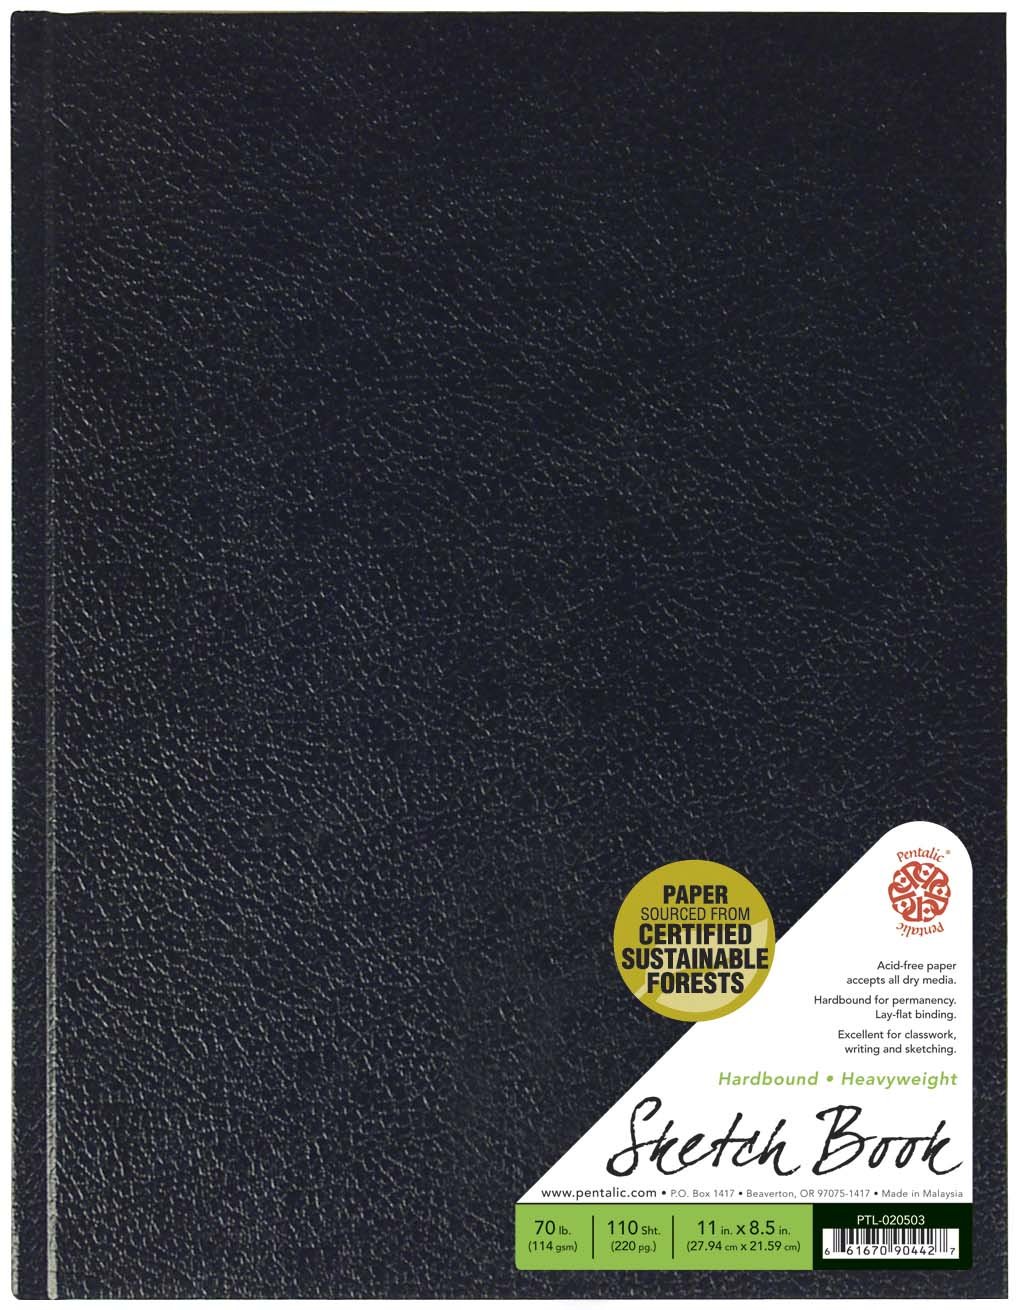  A5 Sketchbook, Lay Flat Softcover Sketch Book for Everyone,  Ideal for Ink, Water Color, Pen, Pencils, 160 Tear Resistant Pages, Size:  Medium, Leda Art Supply : Arts, Crafts & Sewing